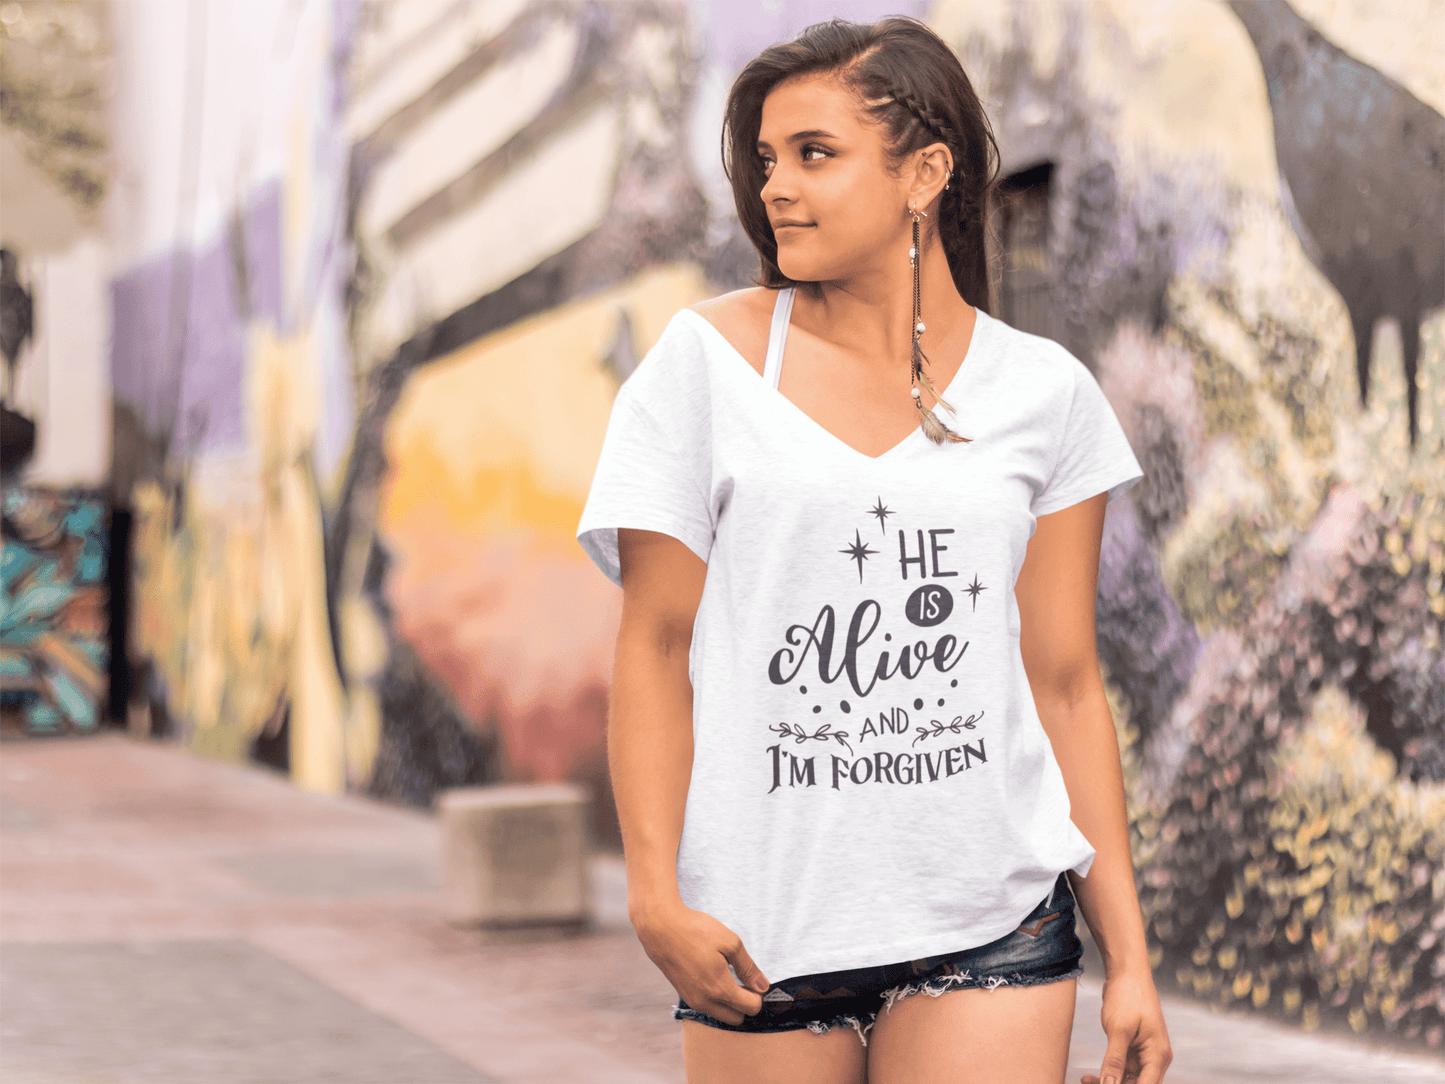 ULTRABASIC Women's T-Shirt He Is Alive and I'm Forgiven - Religious Short Sleeve Tee Shirt Tops